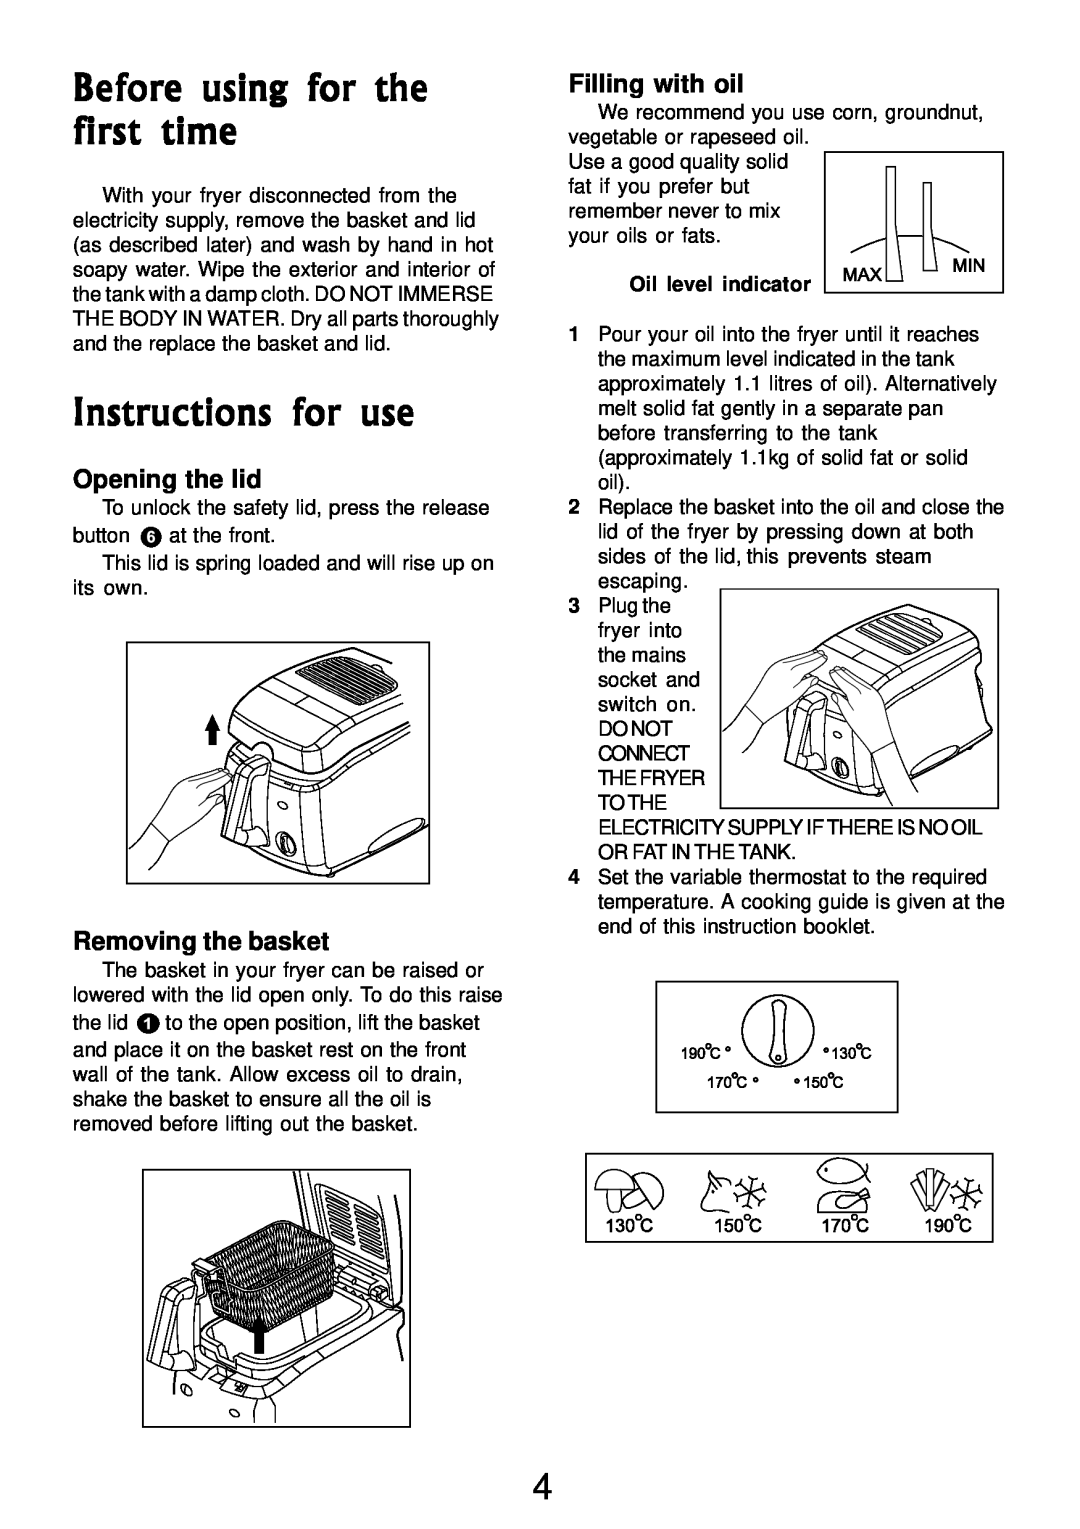 Morphy Richards Compact Fryer Before using for the first time, Instructions for use, Opening the lid, Removing the basket 